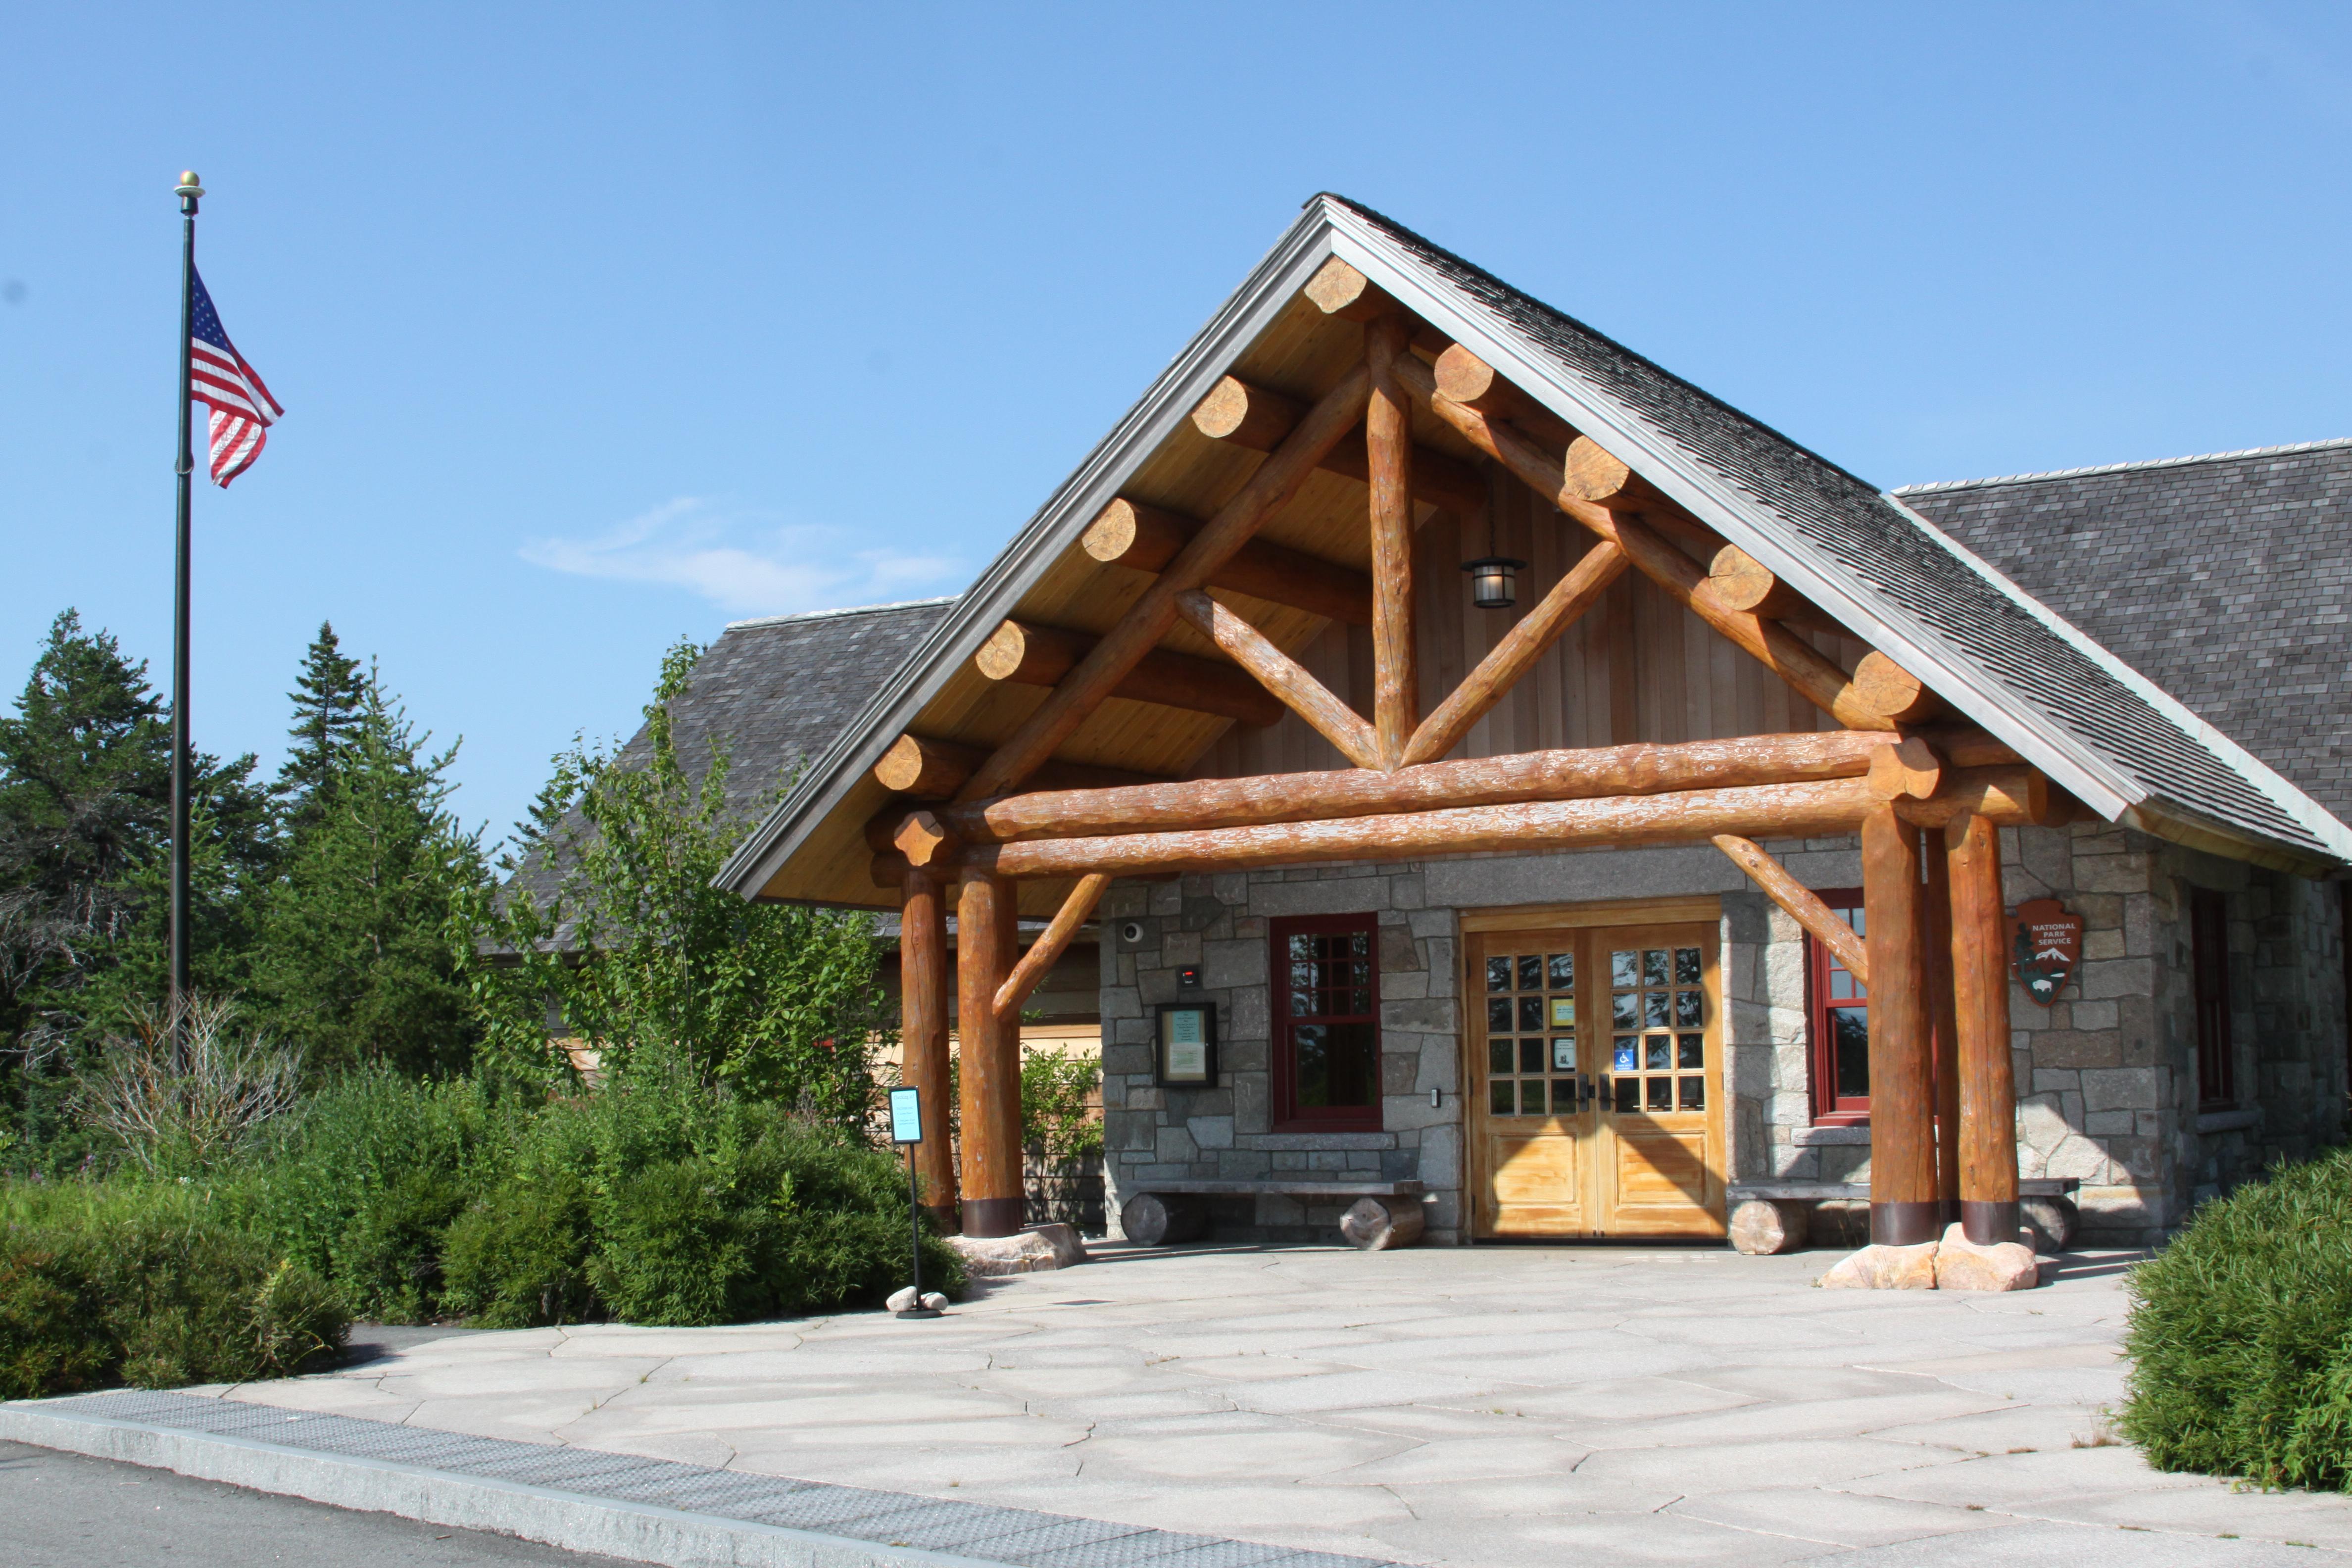 A wooden ranger station building with an A-frame style entrance